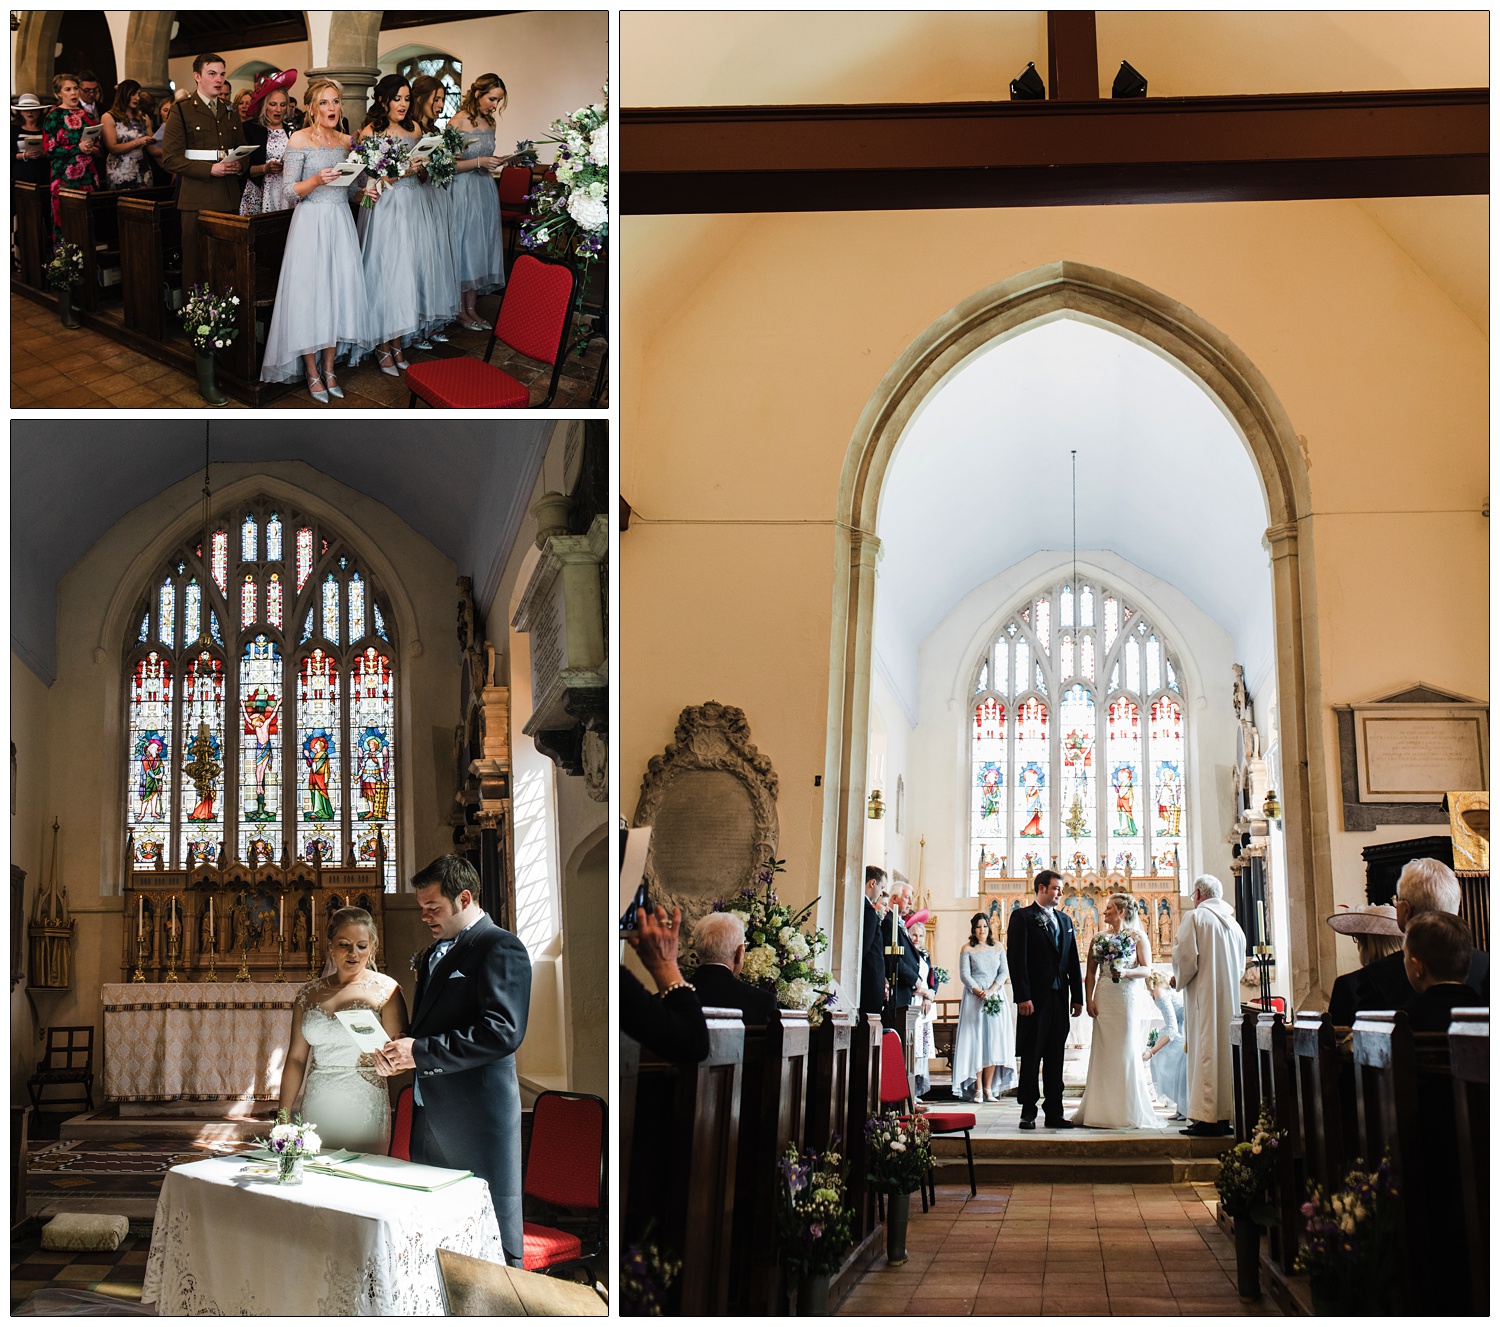 Inside the St Christopher's Church in Willingale during the wedding ceremony. Behind the couple is the east window of the chancel, a stained glass window made in approx. 1878 by the firm Saunders and Co.